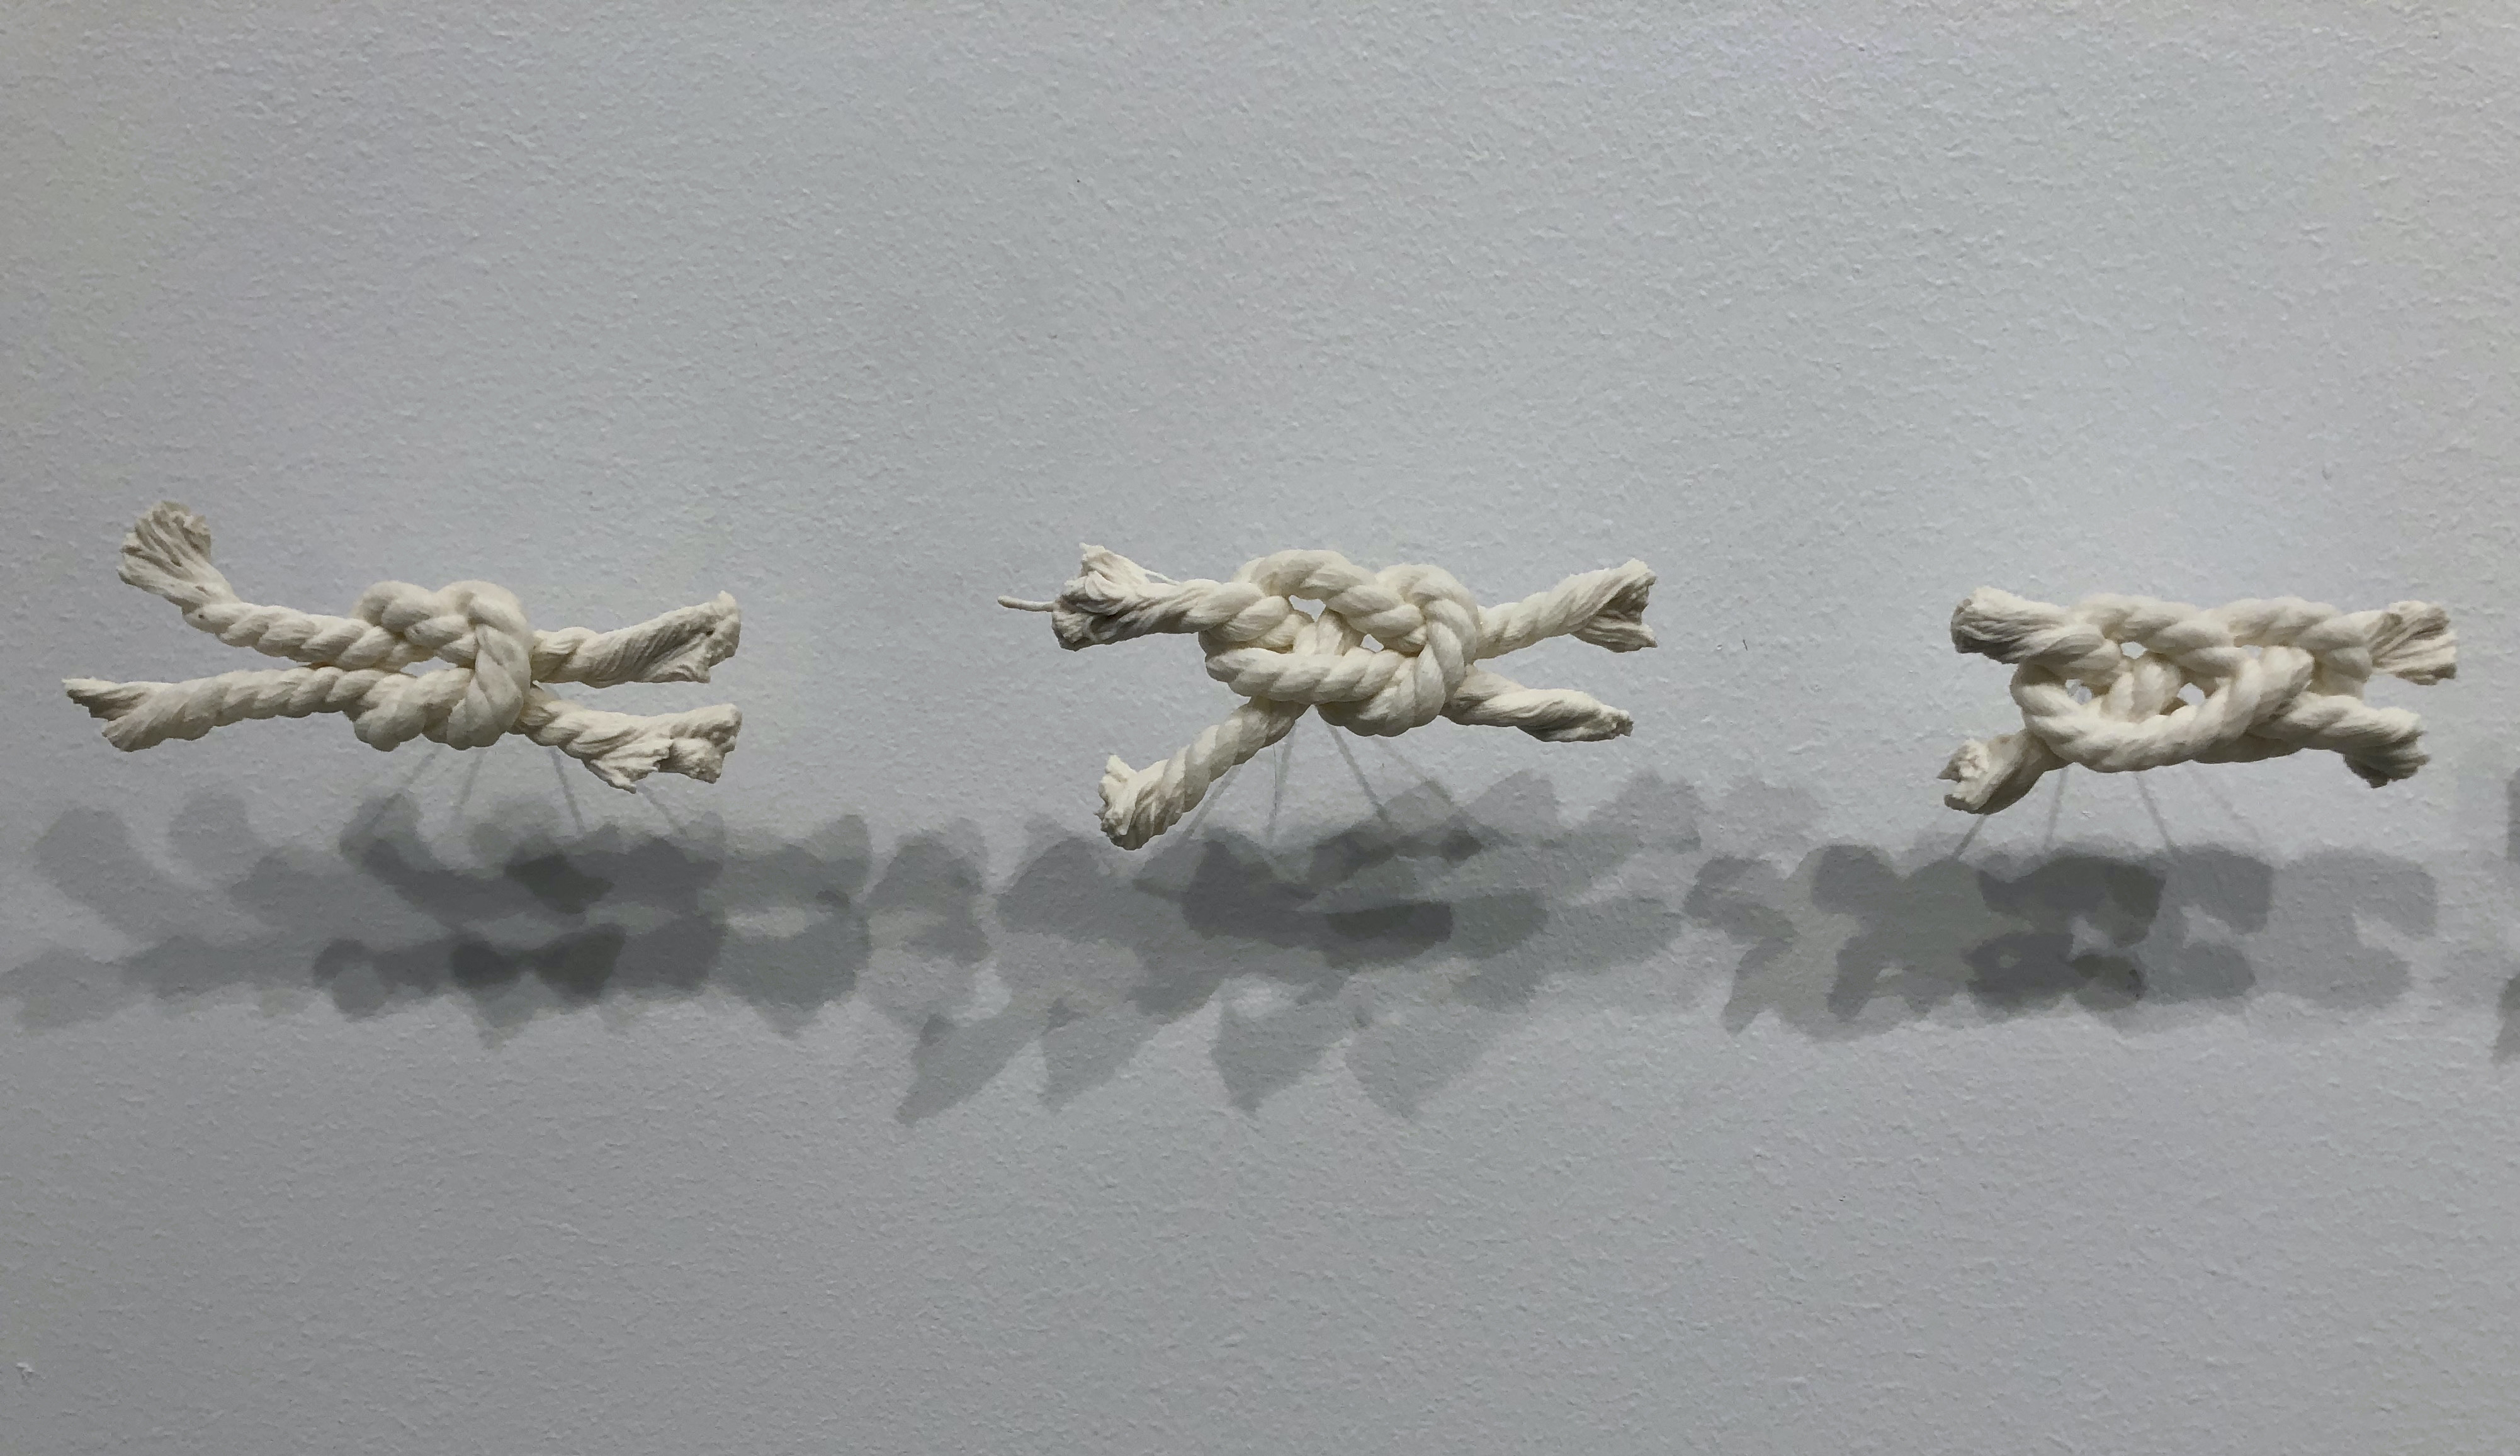 Art installation Embellished showing three rope knots mounted on a wall.